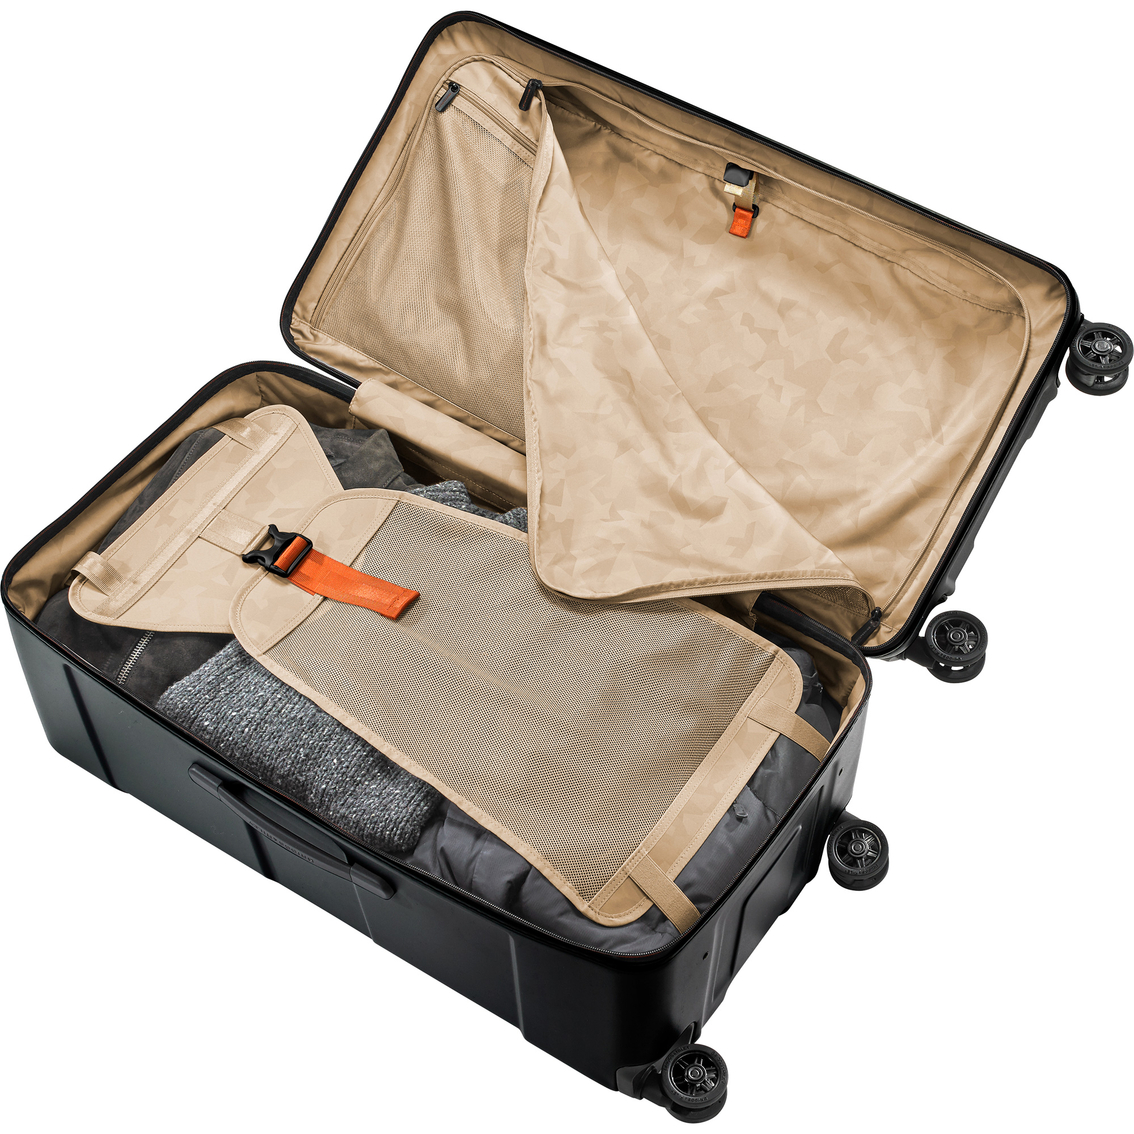 Briggs & Riley Torq Trunk Spinner - Image 5 of 10